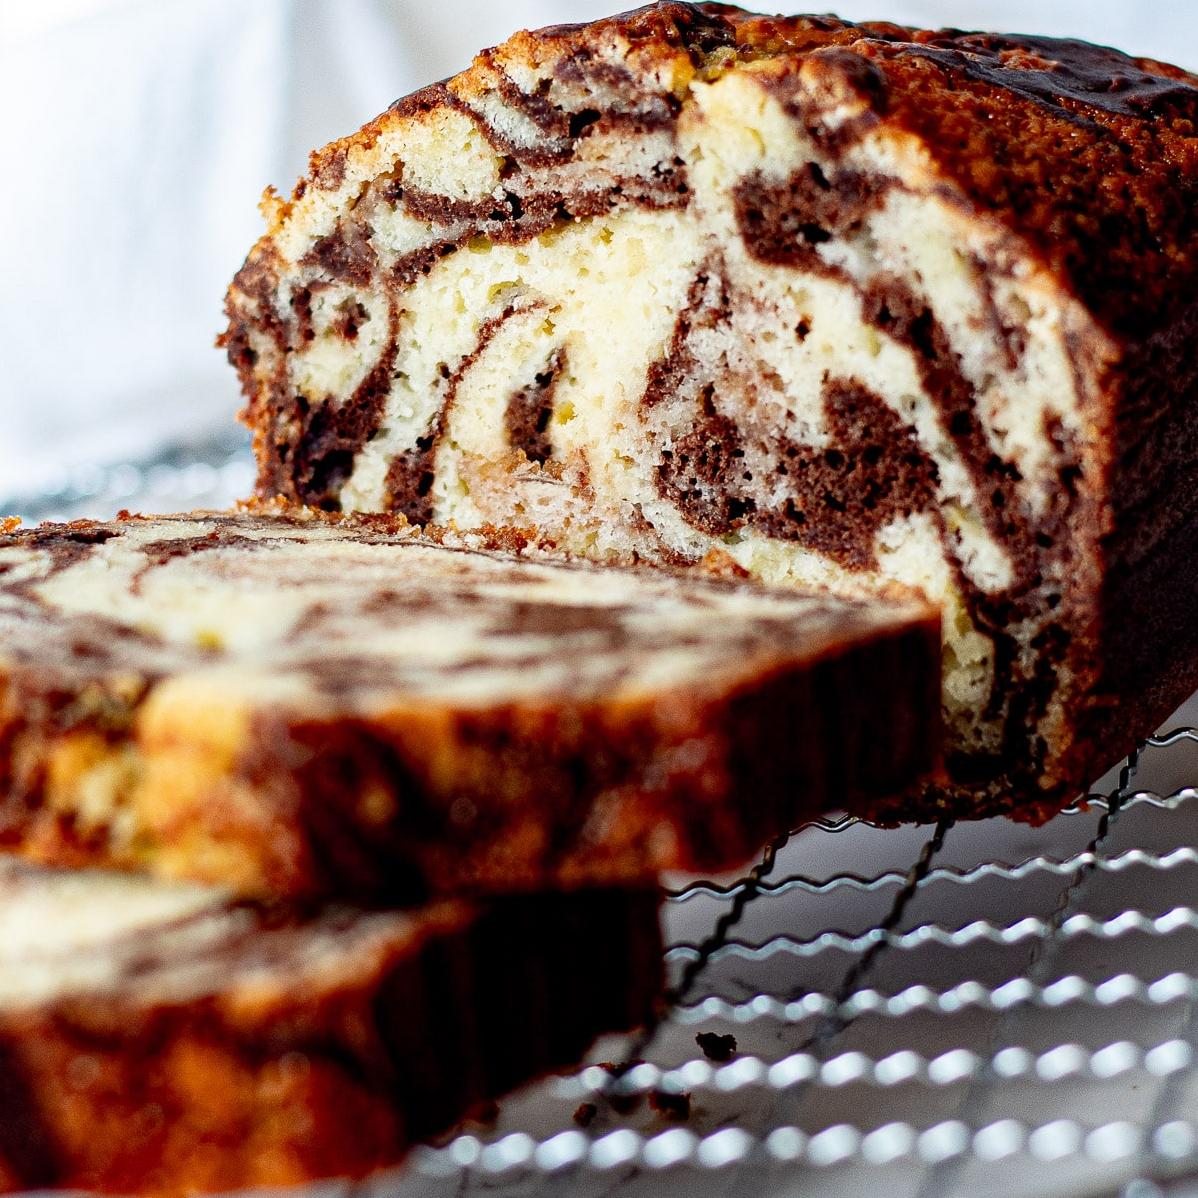  Satisfy your sweet tooth cravings with this rich and moist chocolate pound cake.